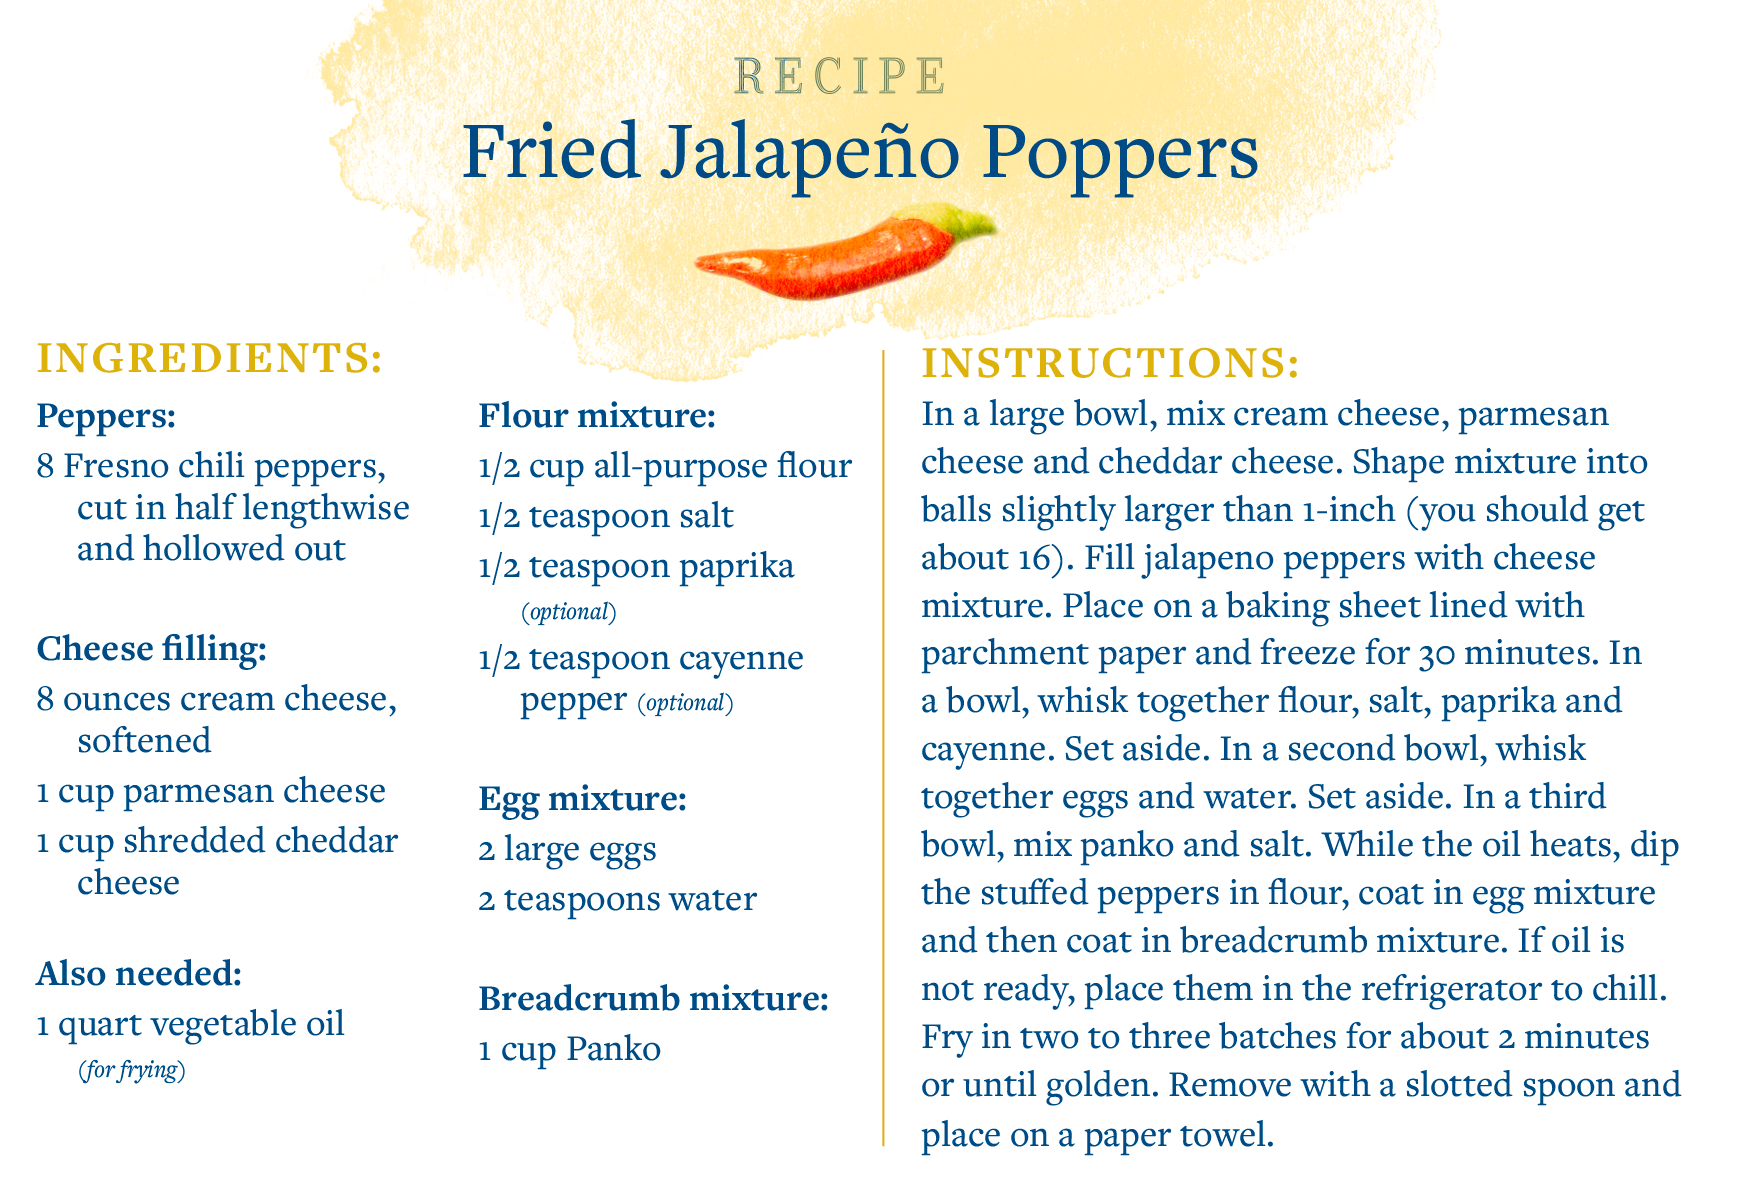 A recipe card for making fried jalapeño poppers.